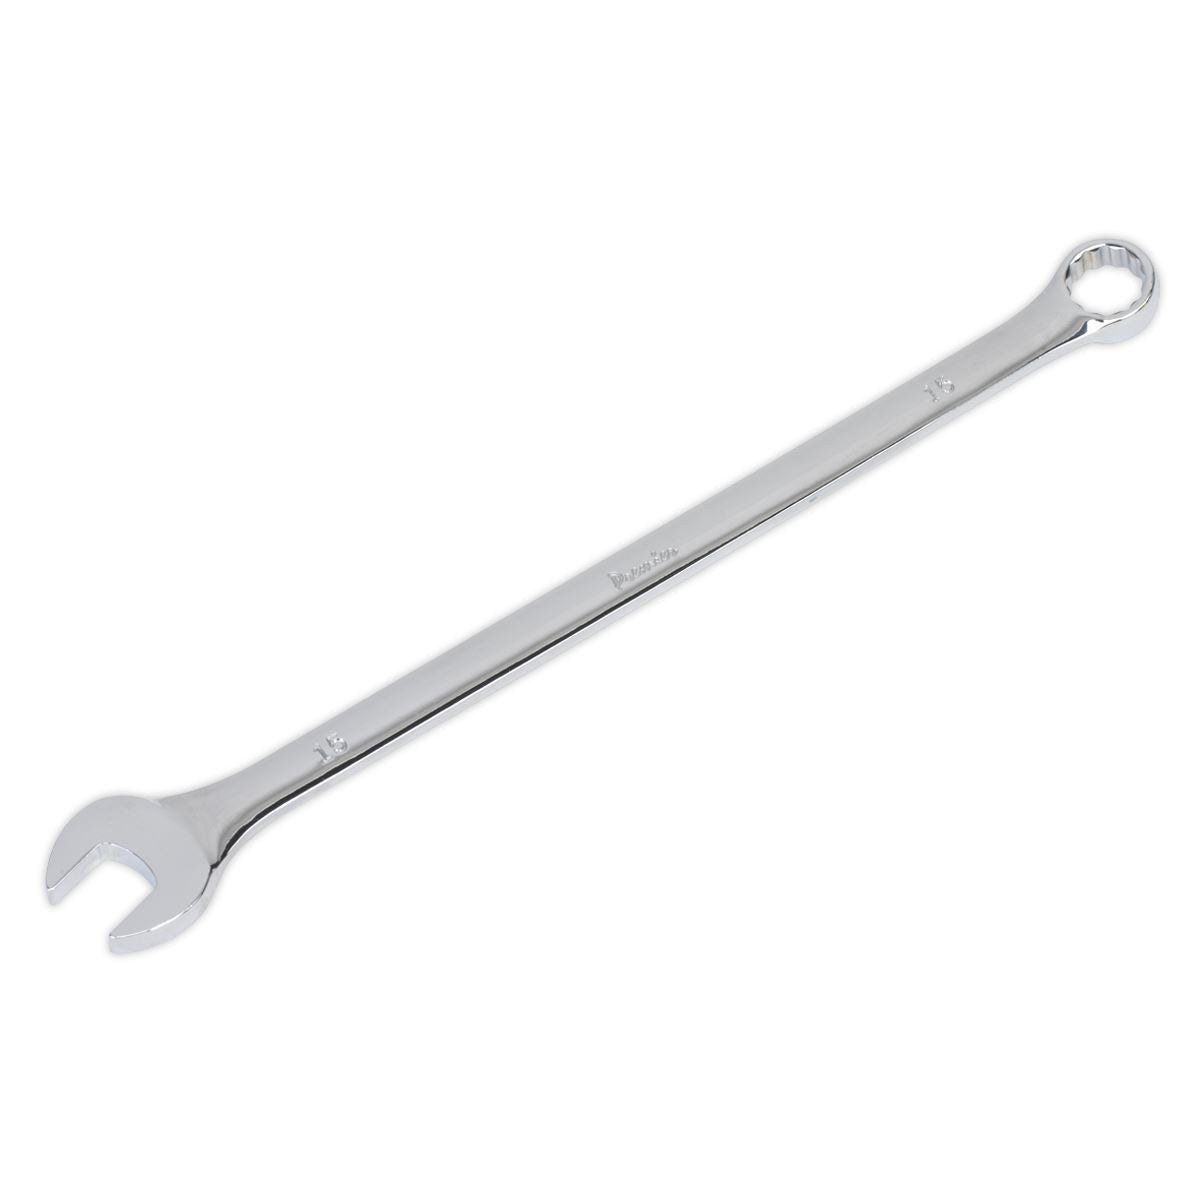 Sealey Combination Spanner Extra-Long 15mm Premier WallDrive Wrench Garage Tool